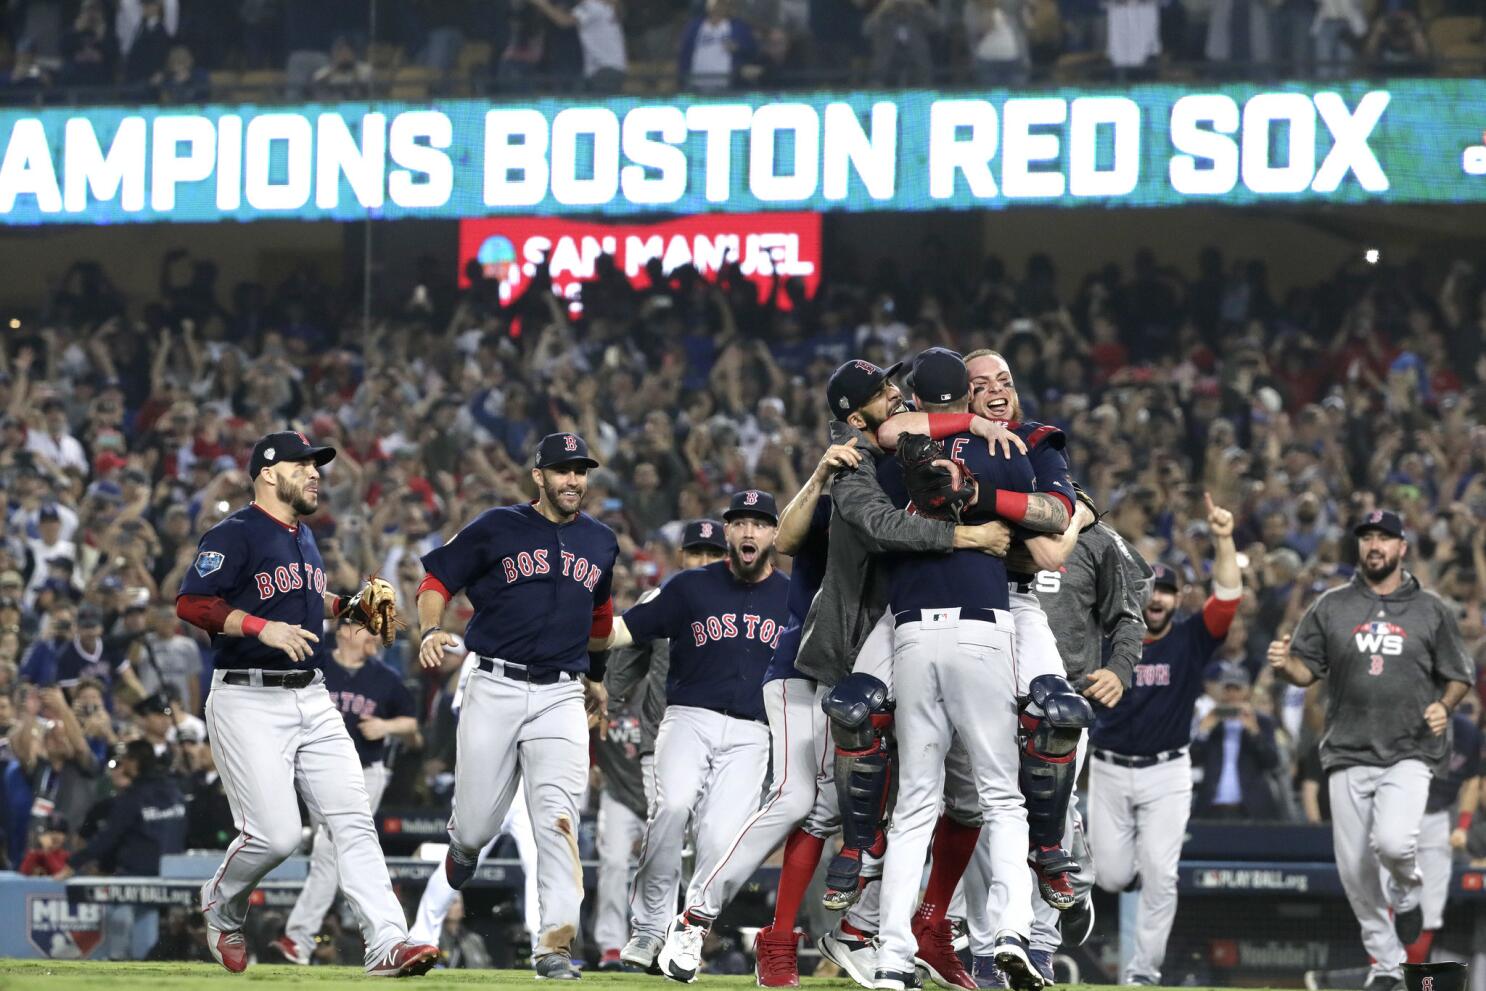 Boston Red Sox win the World Series in Game 5 with pitching gem